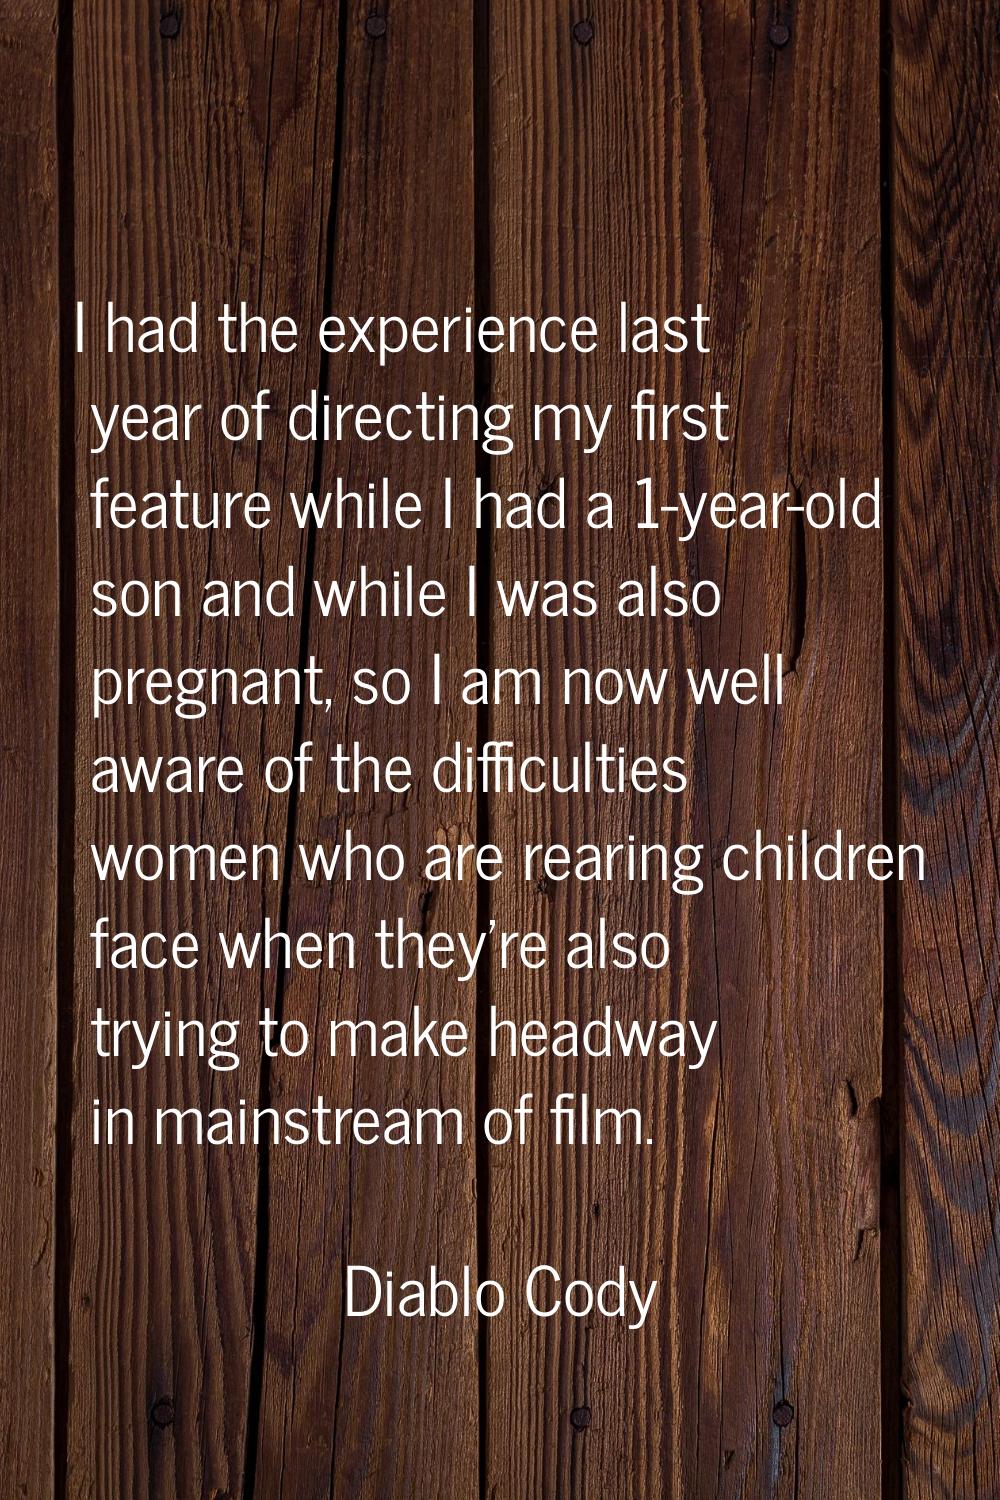 I had the experience last year of directing my first feature while I had a 1-year-old son and while